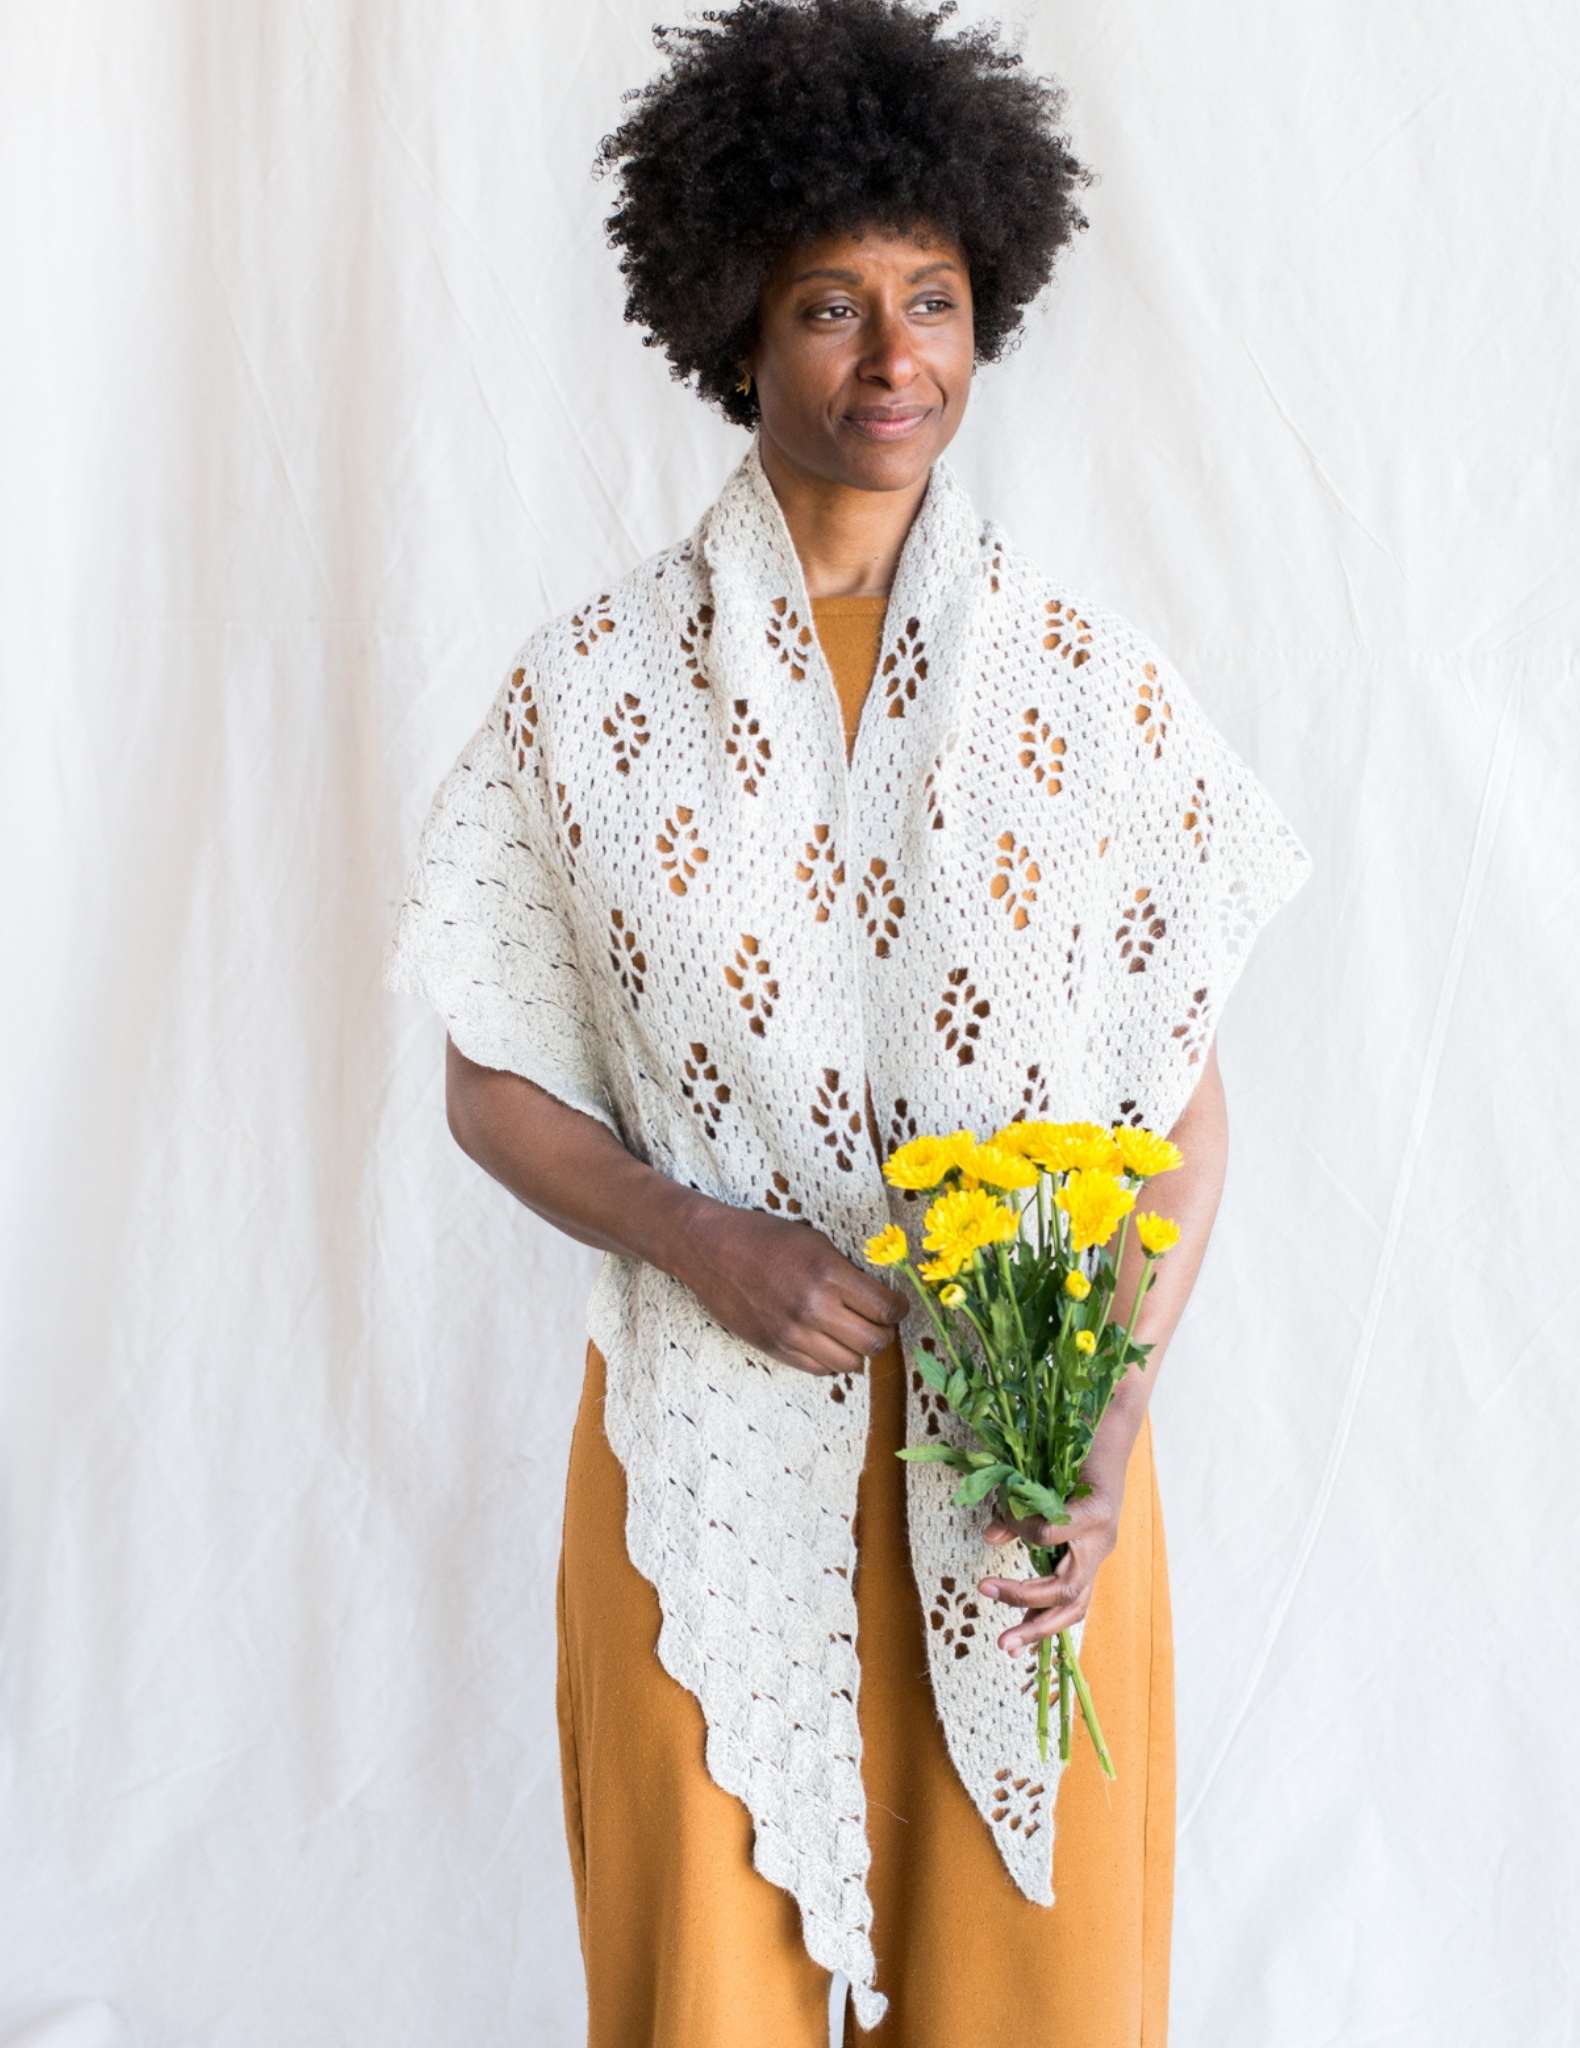 A large crocheted white shawl with lace details is worn by a black woman holding a bunch of yellow flowers. The model faces the camera with the corners of the shawl draped over each shoulder.